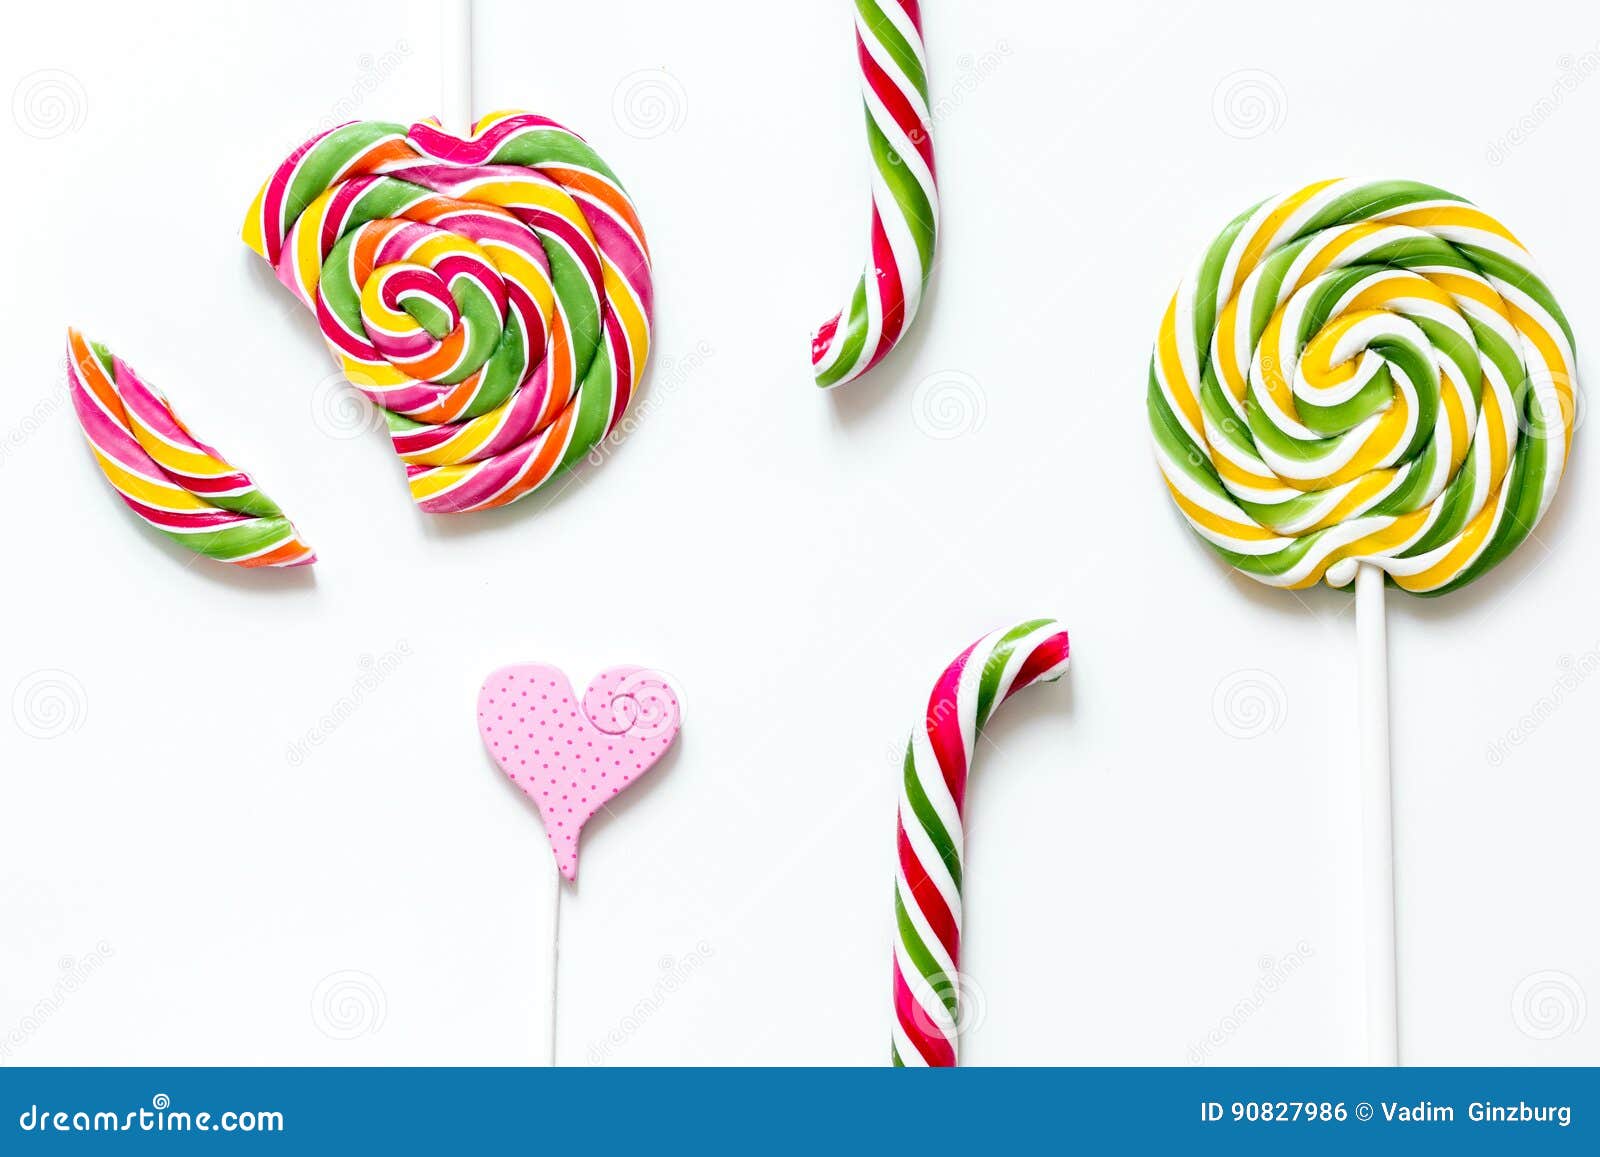 Sweets and Sugar Candies on White Background Top View Stock Photo ...